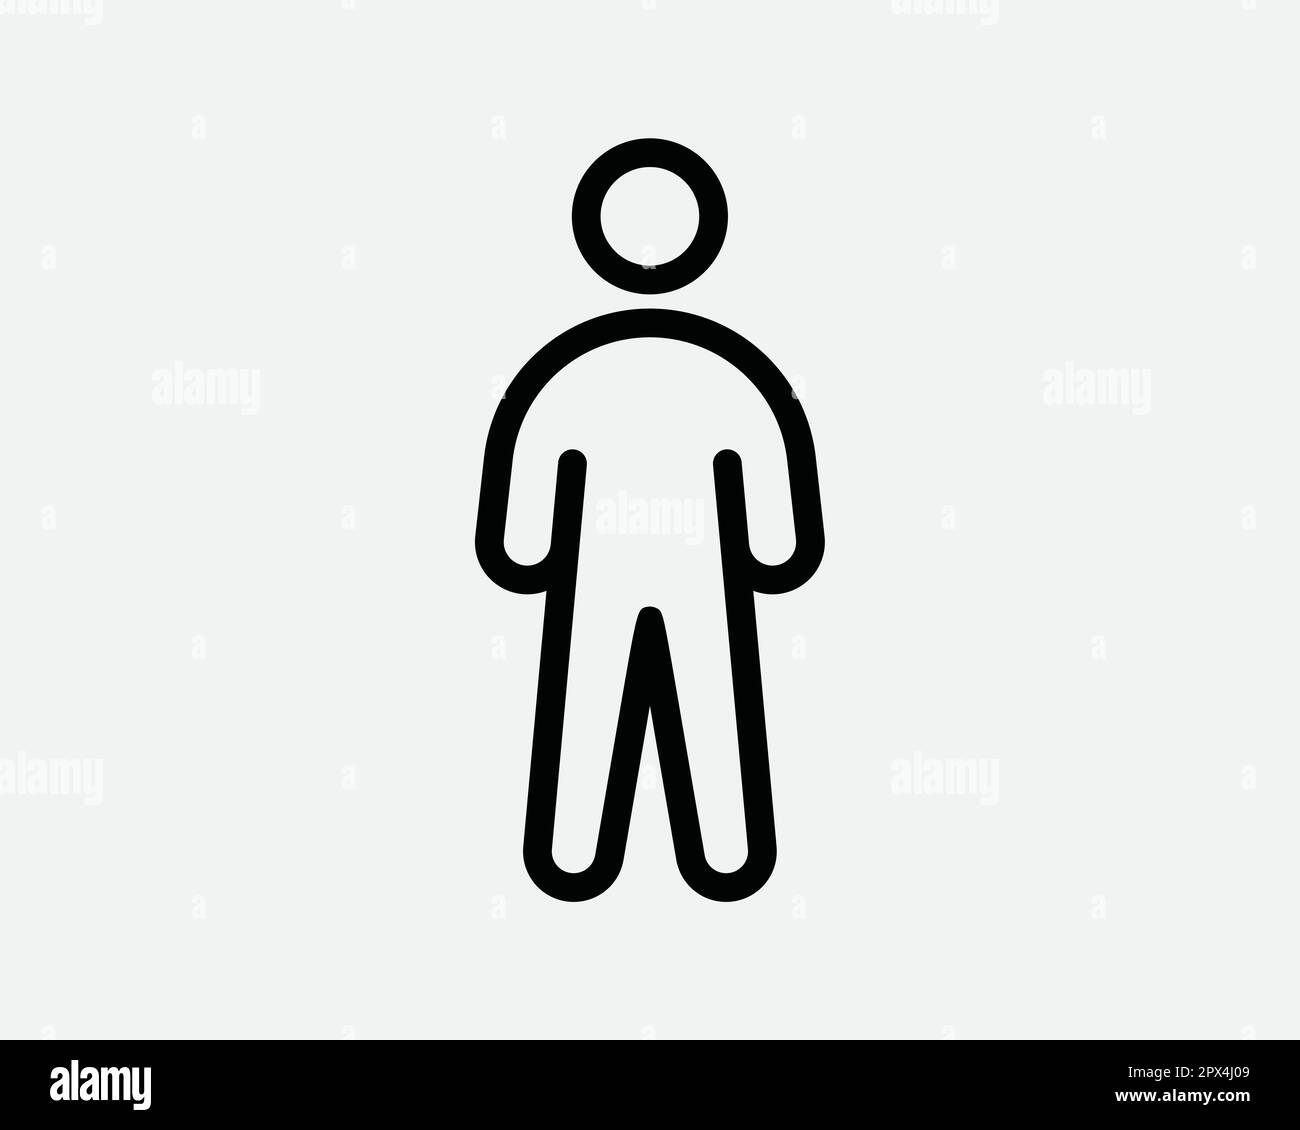 Stick Figure Line Icon. Man Person Stand Standing Linear Symbol. Sickman Boy Profile Character Avatar User Sign Vector Graphic Illustration Clipart Stock Vector